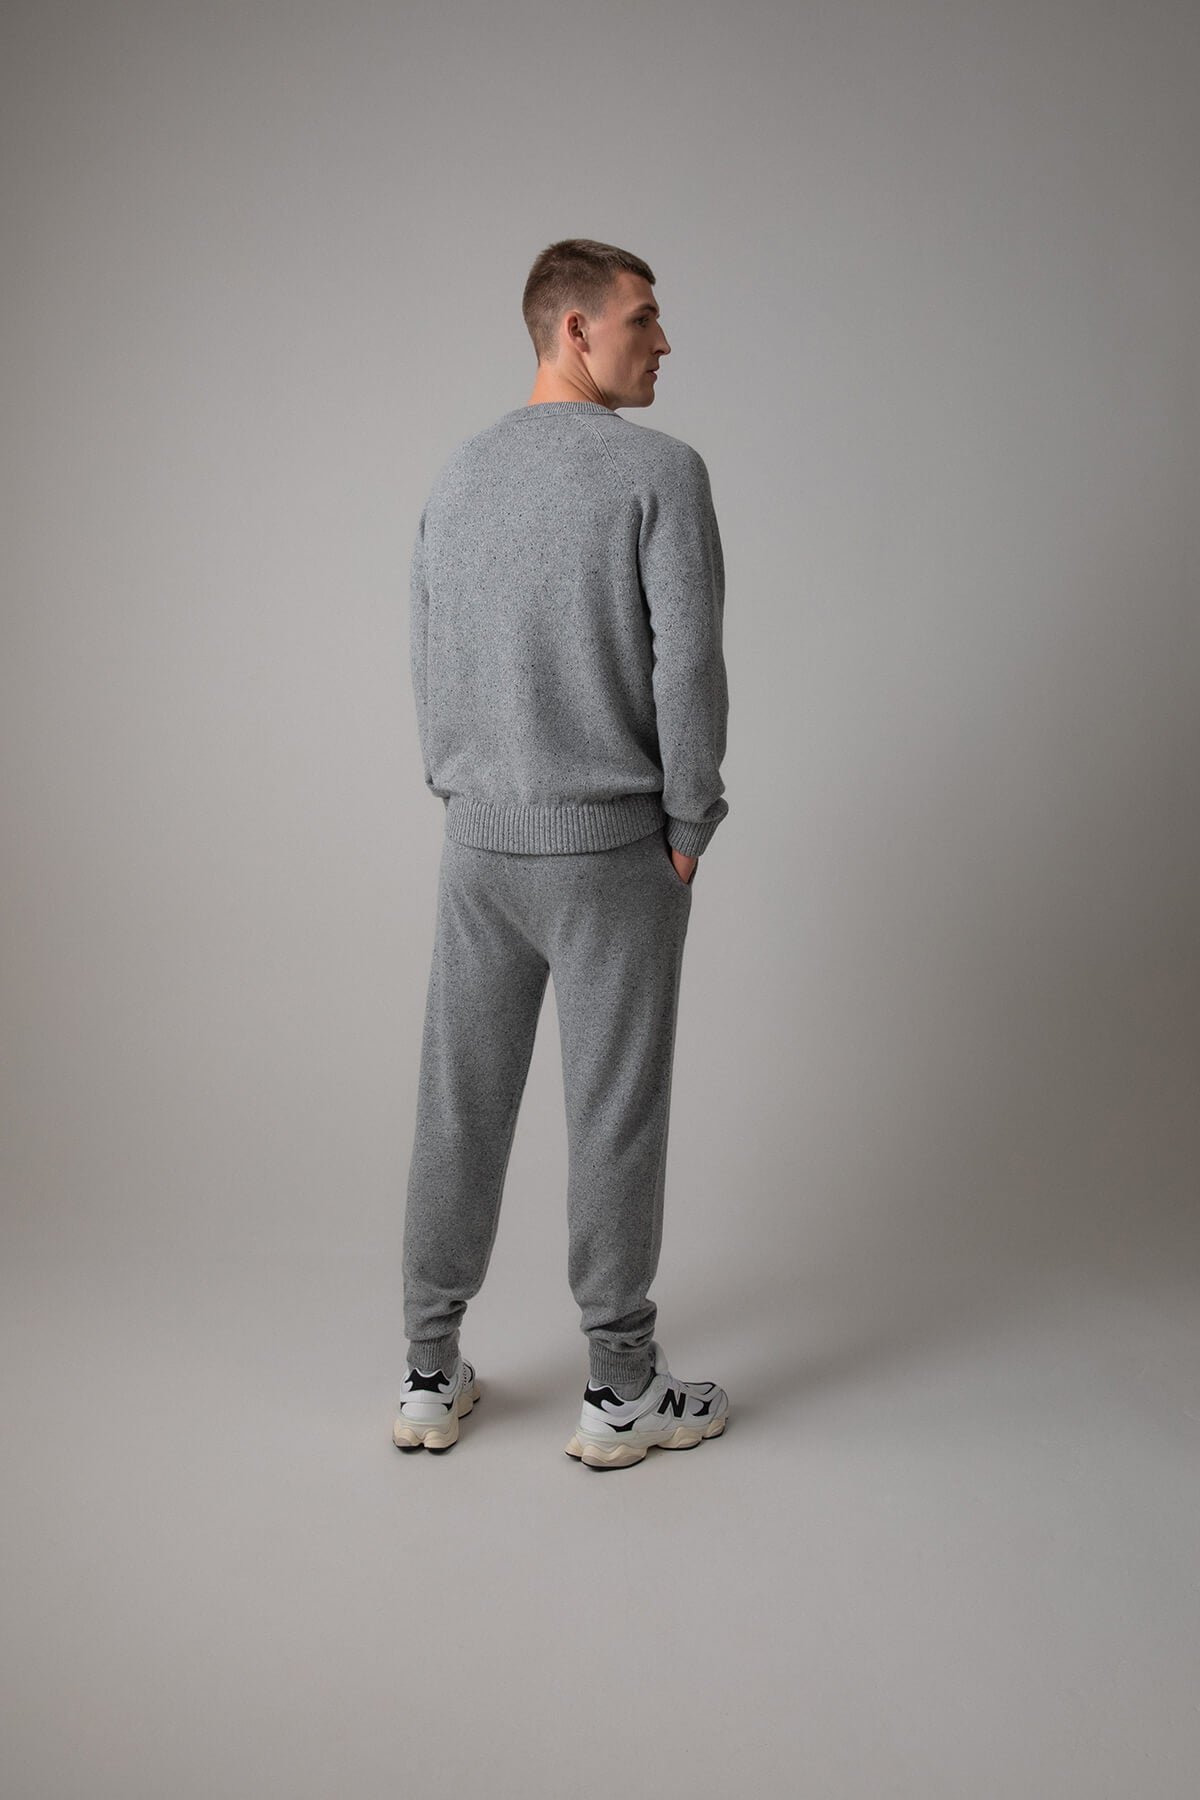 Johnstons of Elgin’s Men's Cashmere Donegal Joggers in Light grey on model wearing matching grey cashmere jumper on a grey background KAI05146004542